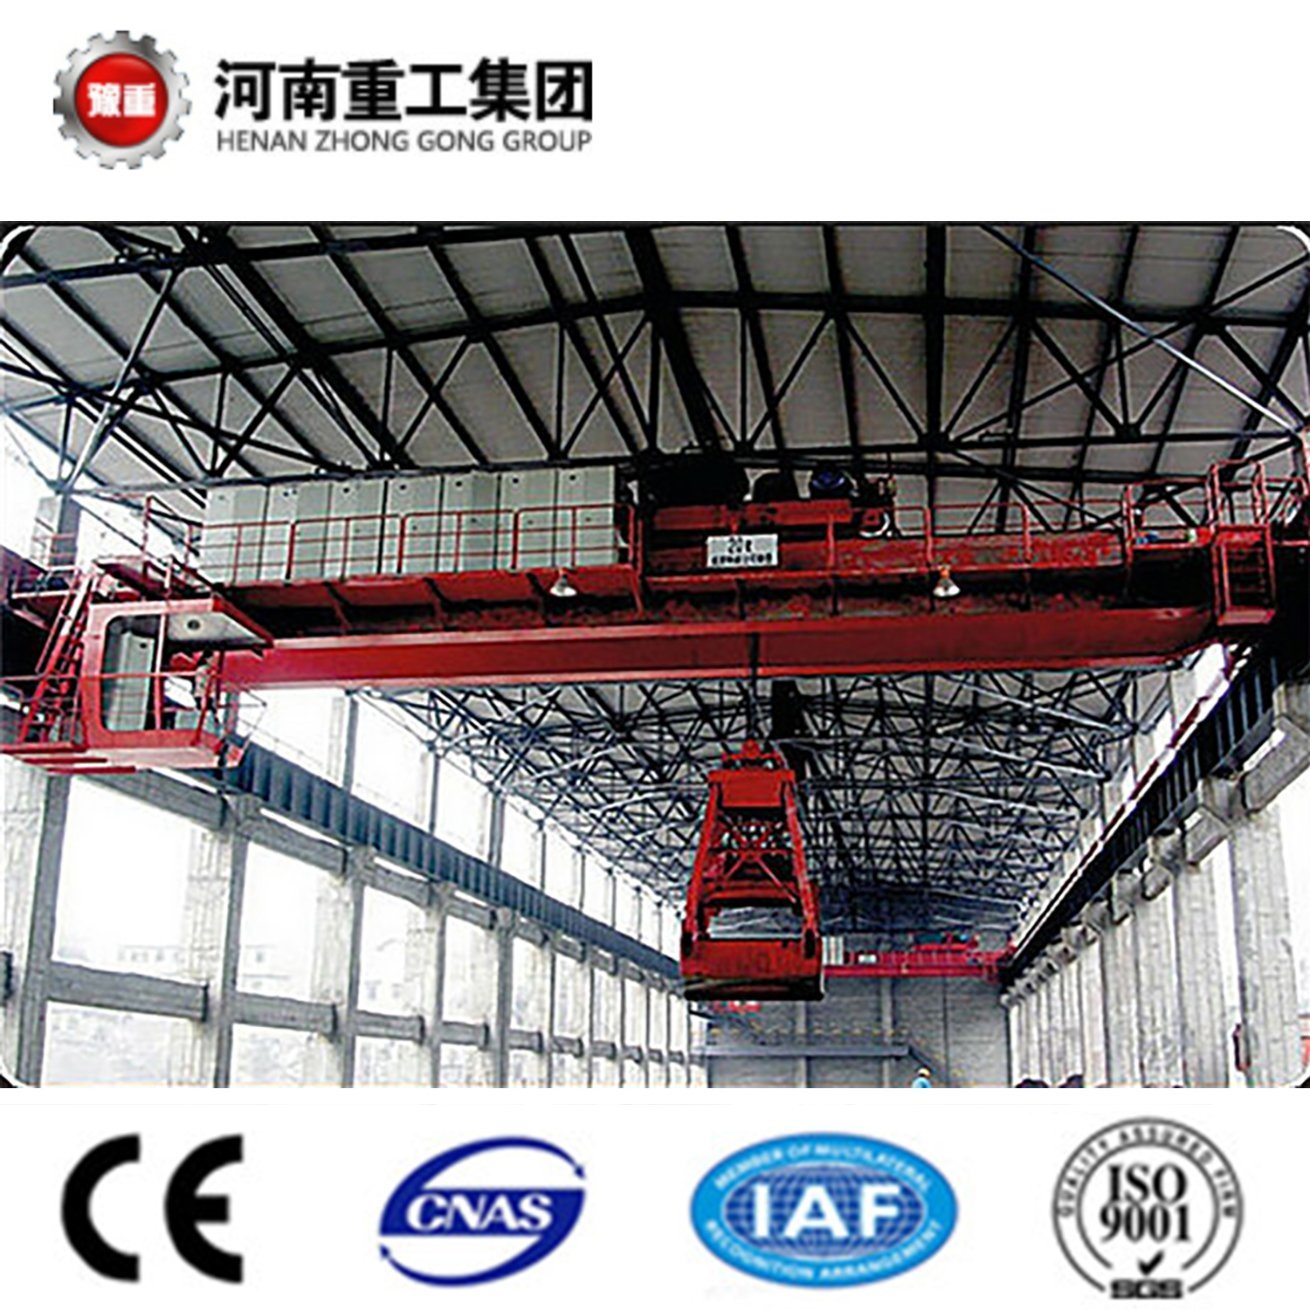 
                Hot Selling 5-20t Double Girder Bridge Crane with Grab for Wast Material Handling
            